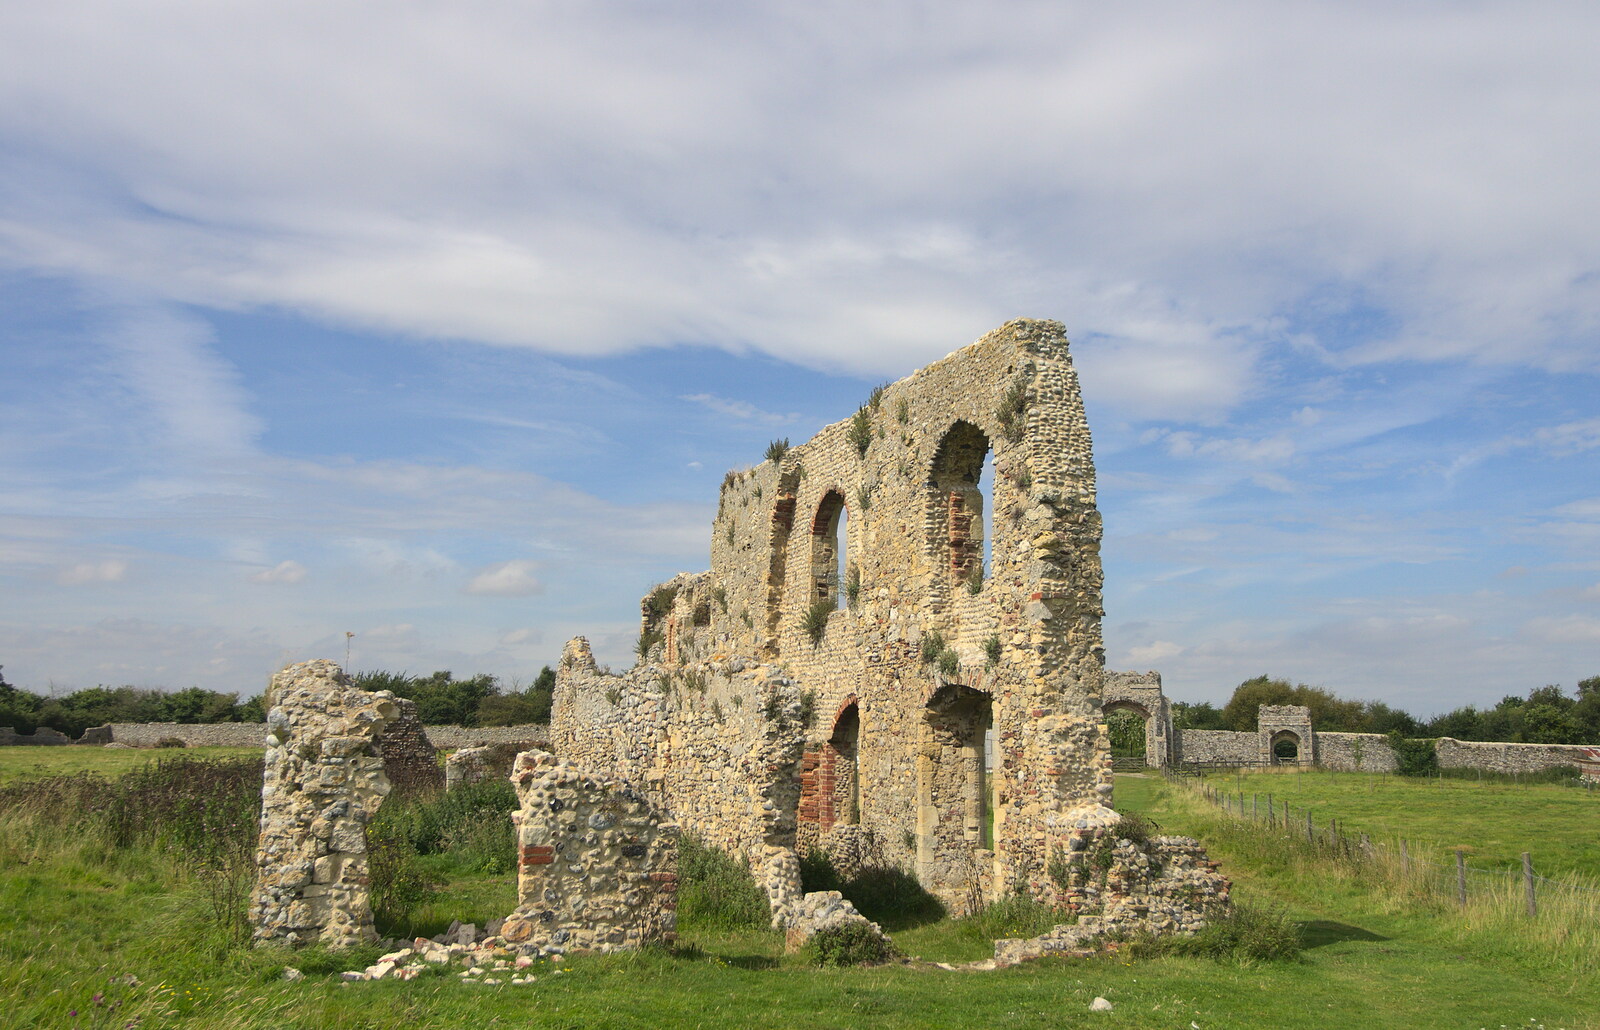 Another view of Dunwich Abbey from Camping by the Seaside, Cliff House, Dunwich, Suffolk - 15th August 2012